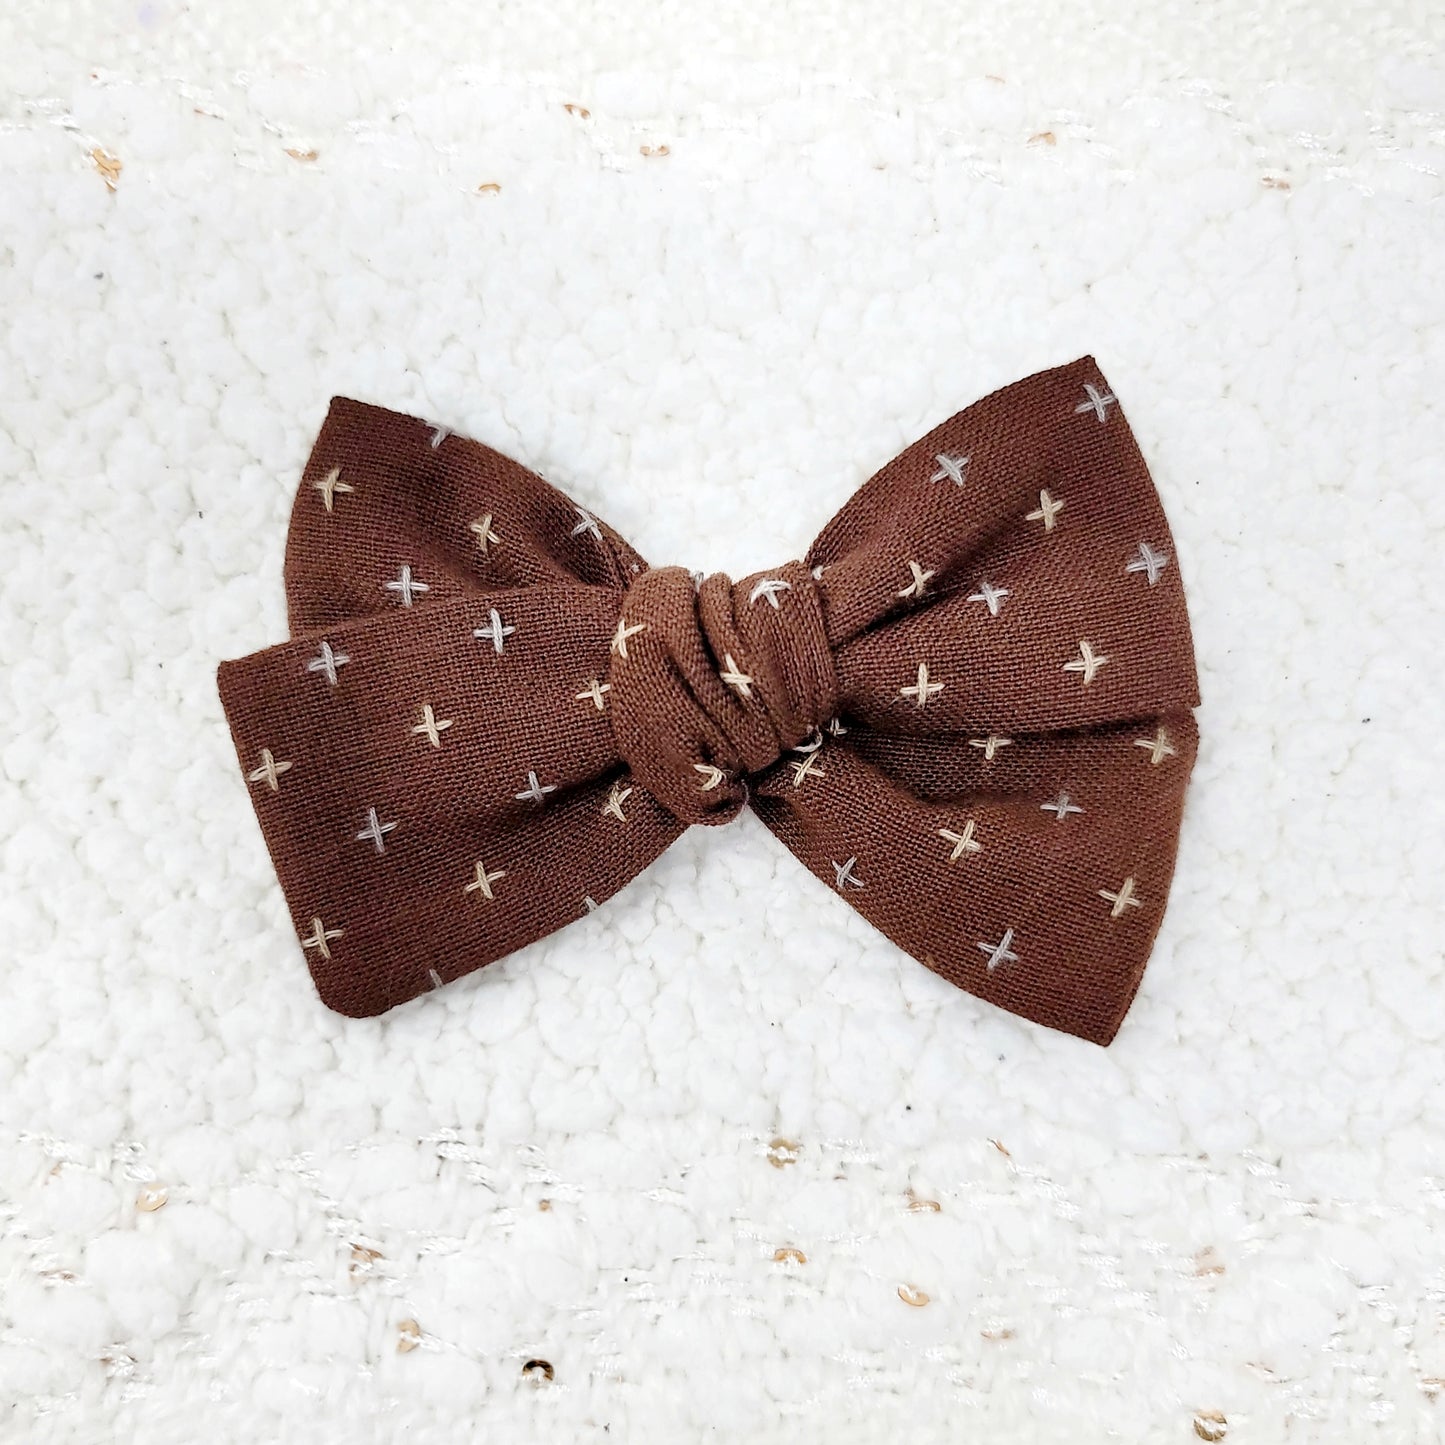 Rustic Brown Stitched Hair Bow